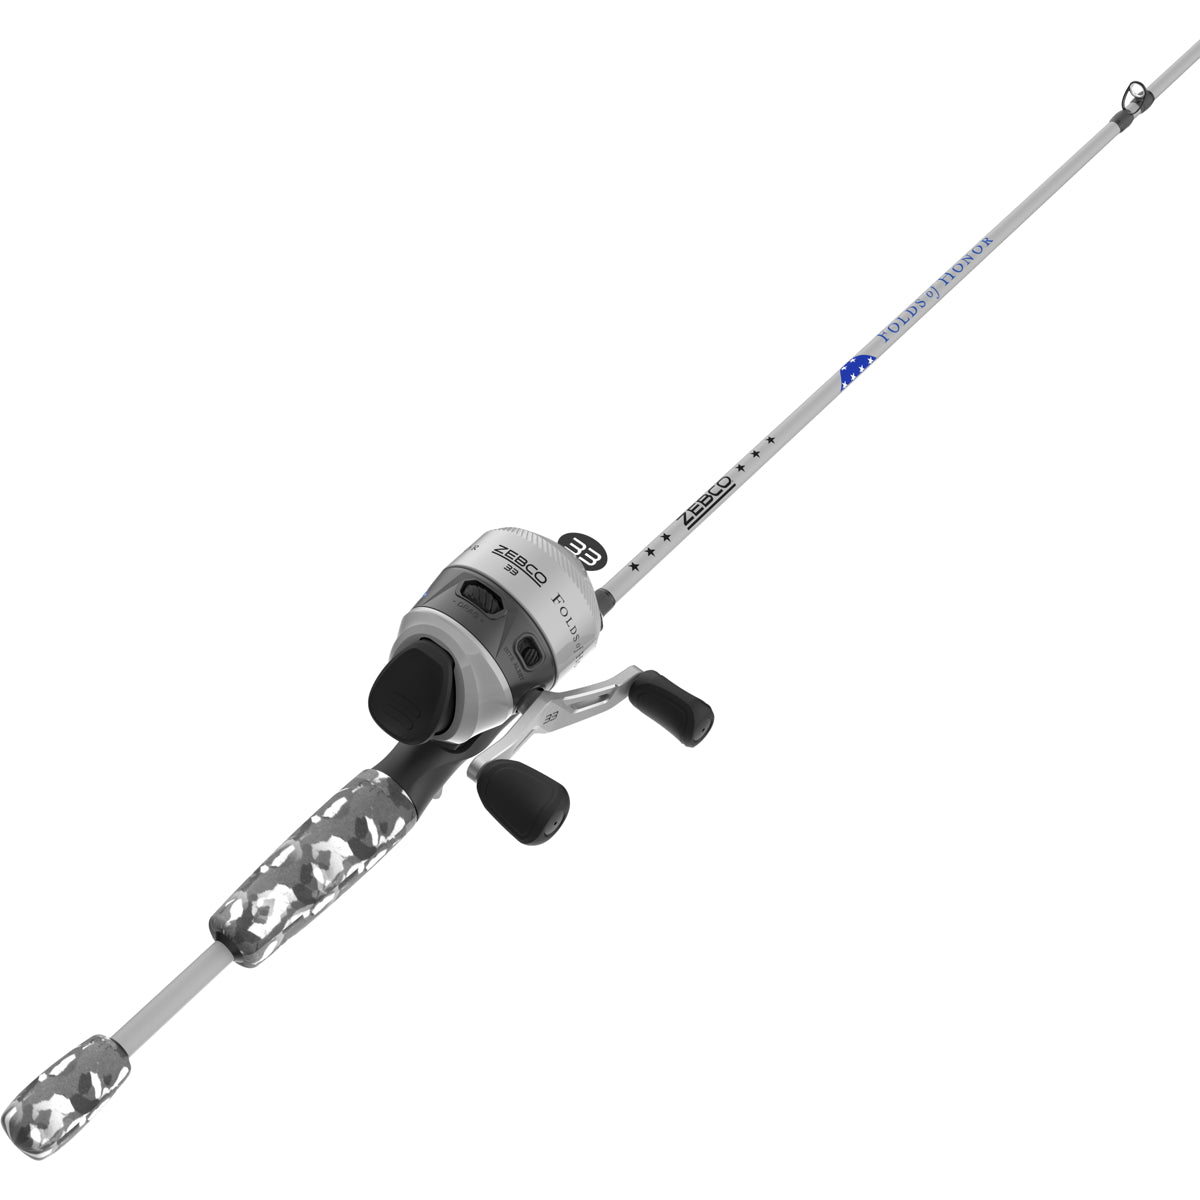 Photo of Zebco Folds of Honor 33602M Spincast Combo for sale at United Tackle Shops.